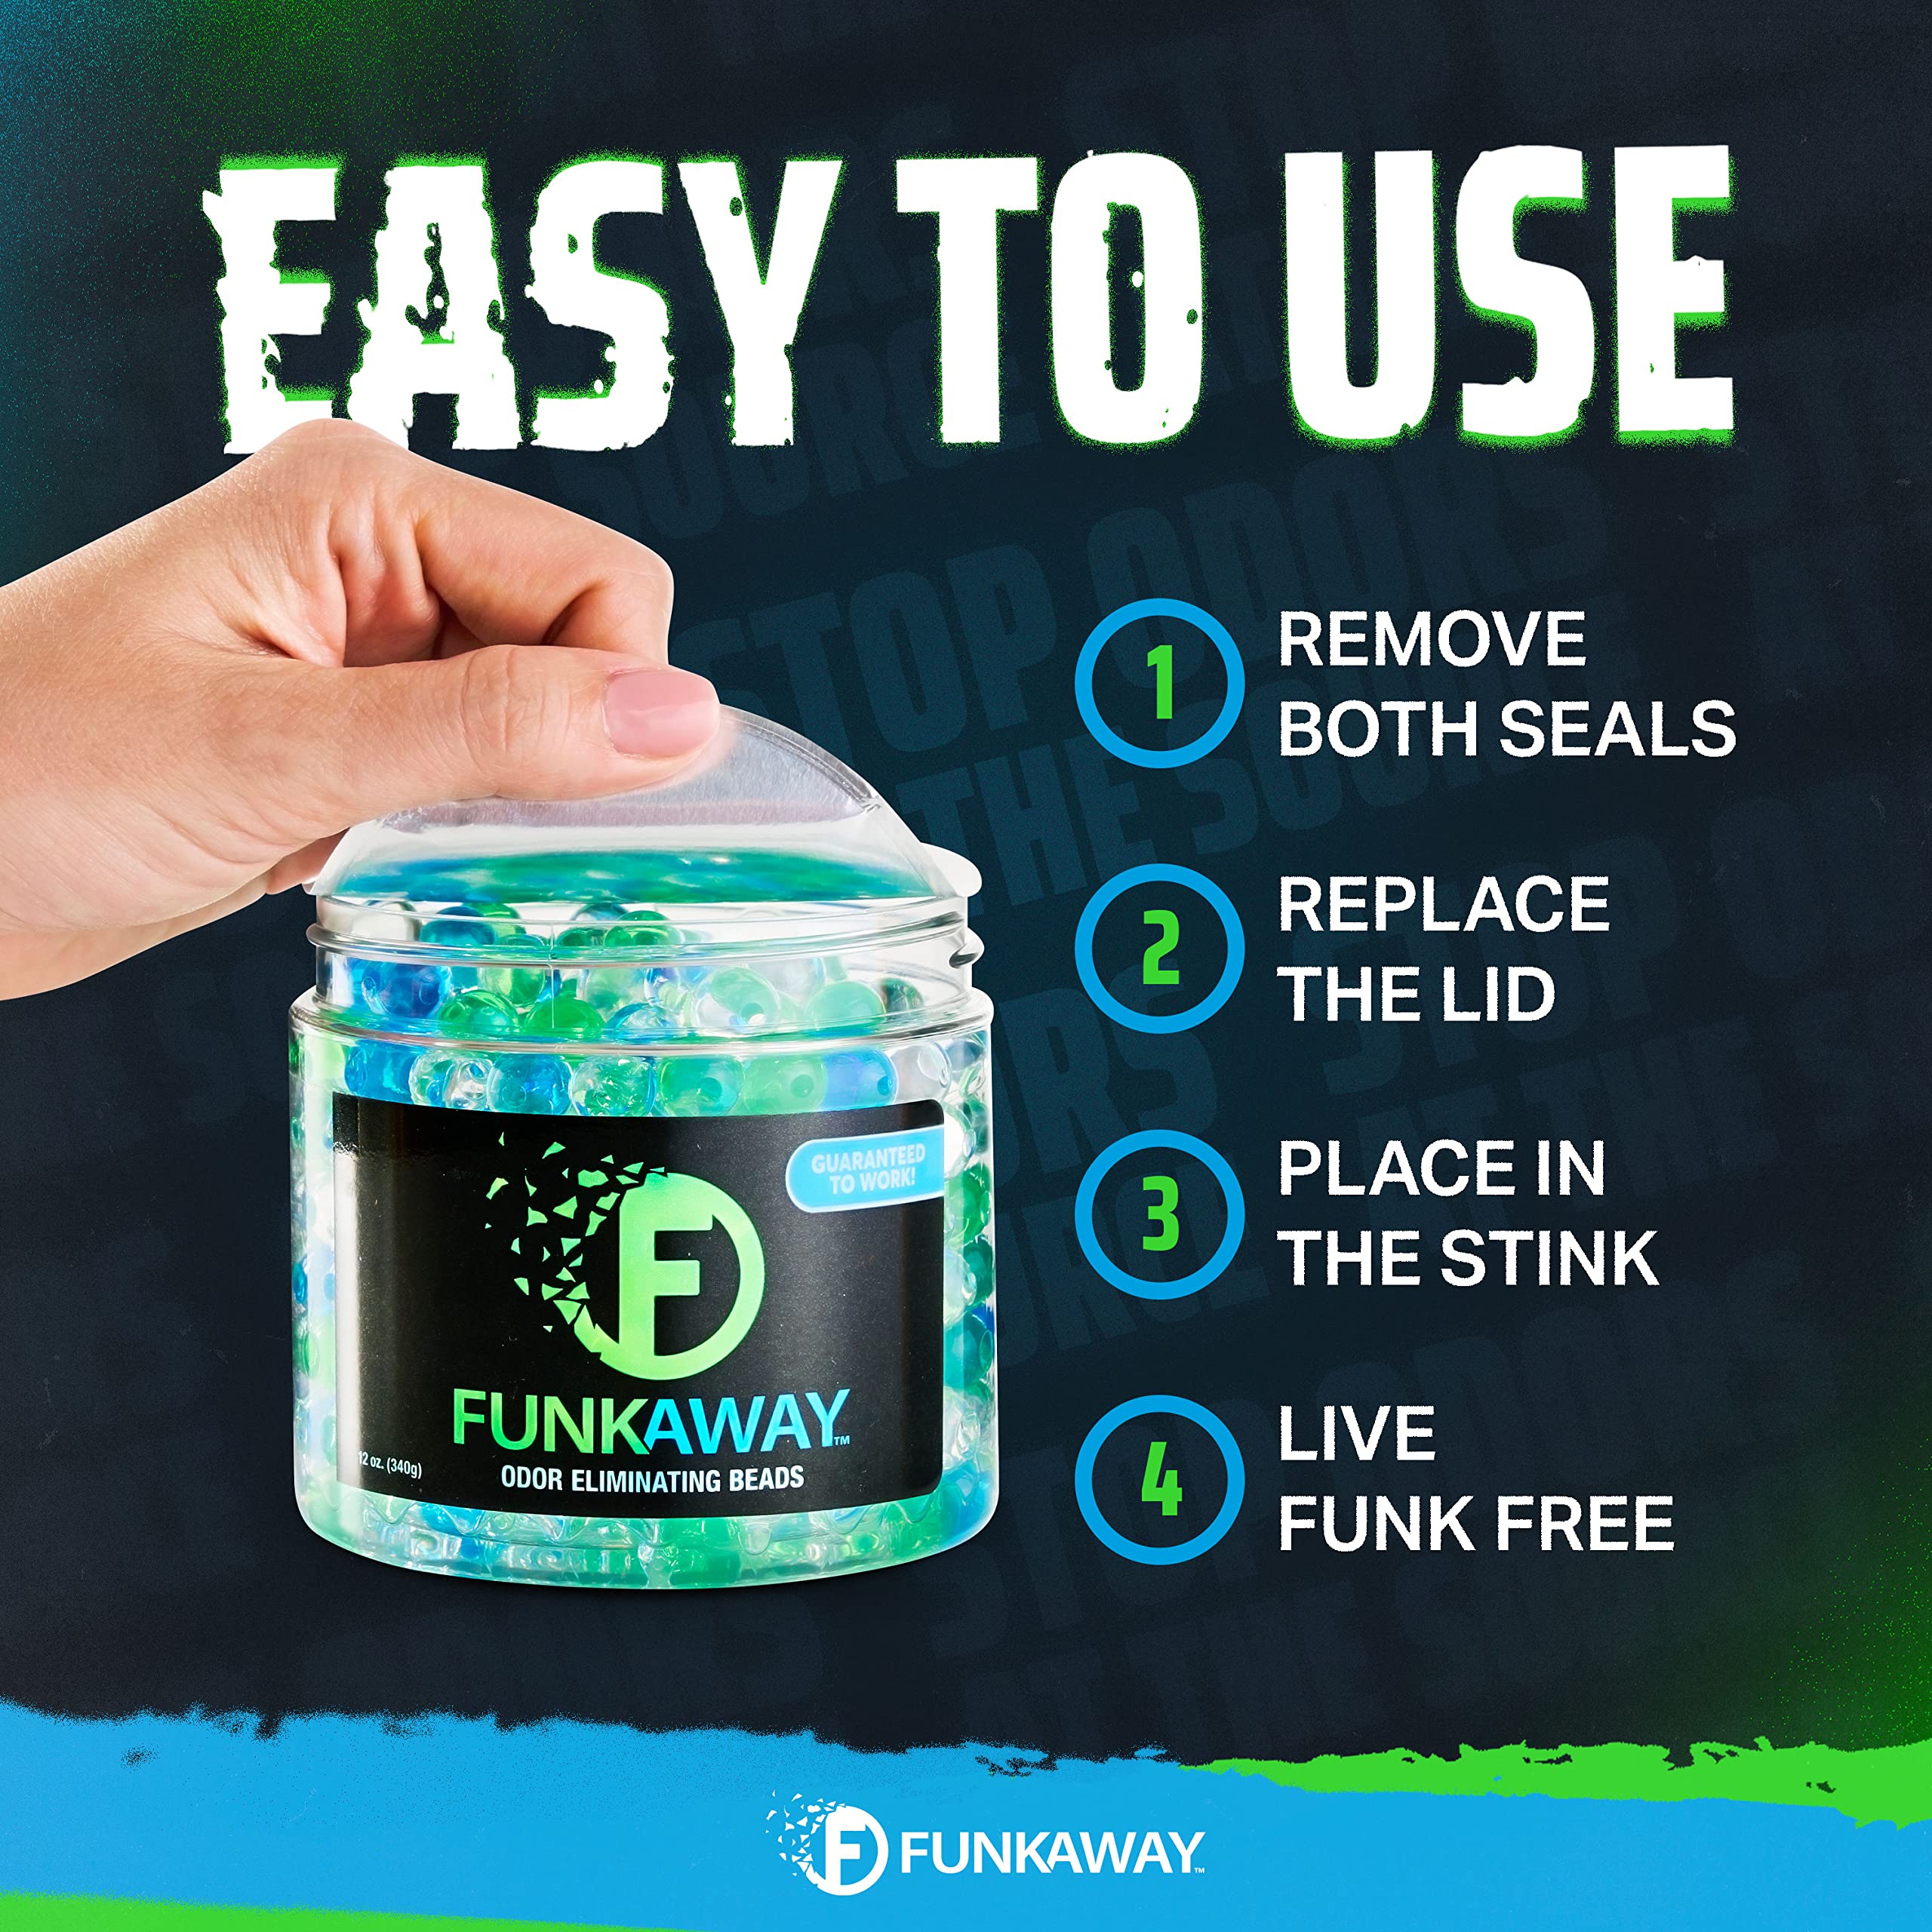 FunkAway Odor Eliminating Beads, 12 oz., Supercharged Odor Absorbing Beads for the House, Car or Gym, Eliminate Smoke, Pet and Bathroom Odors for Long-Lasting Results